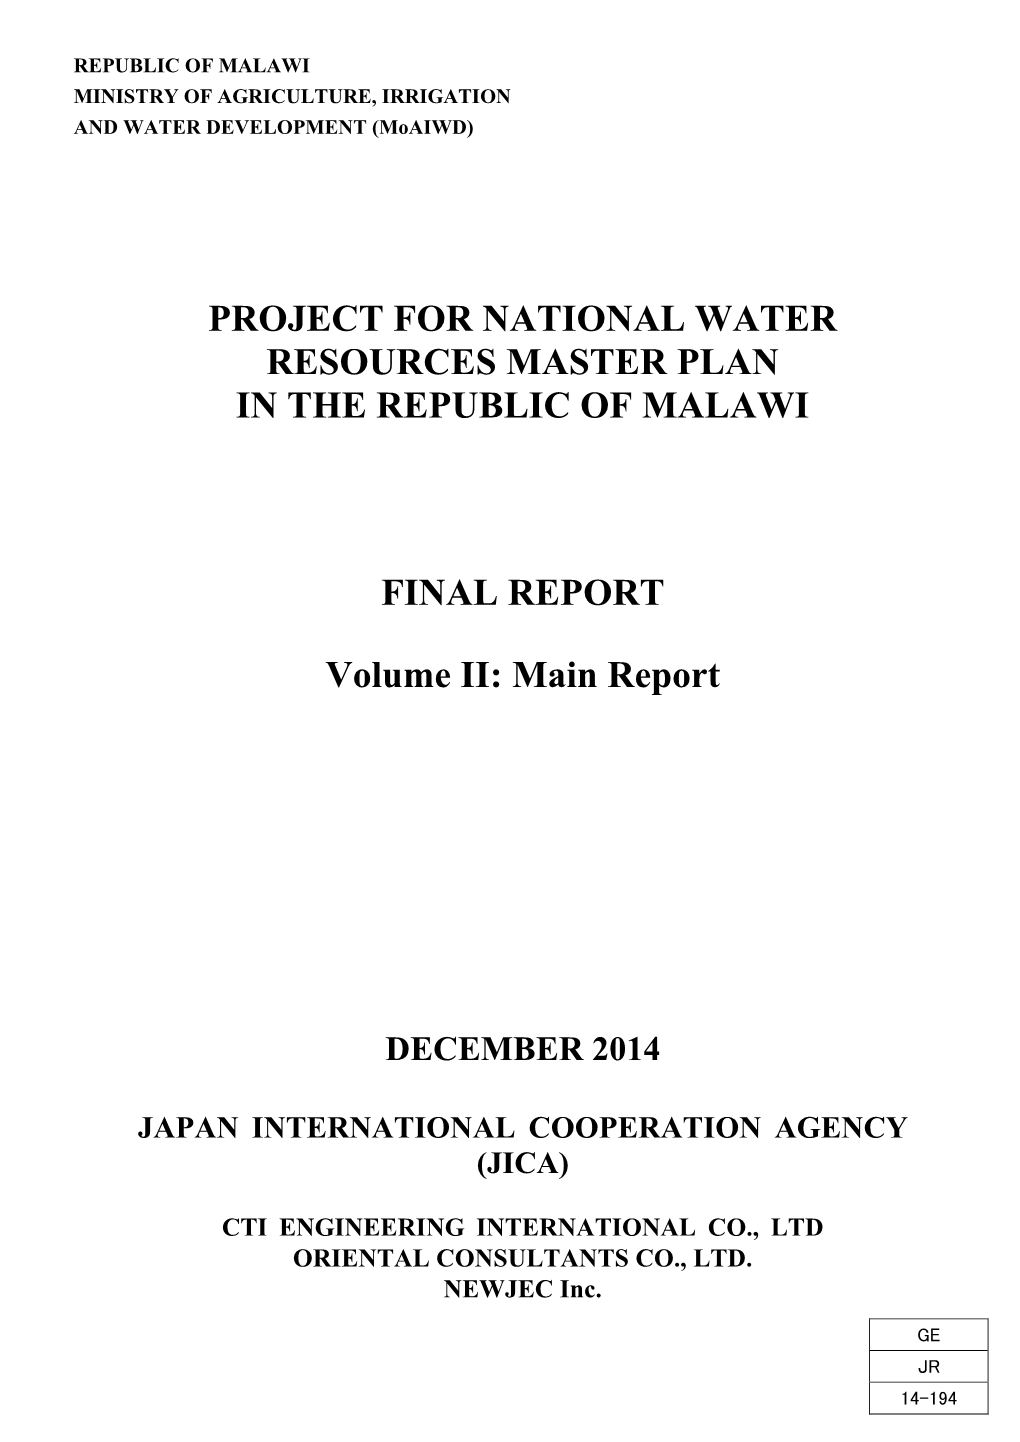 Project for National Water Resources Master Plan in the Republic of Malawi